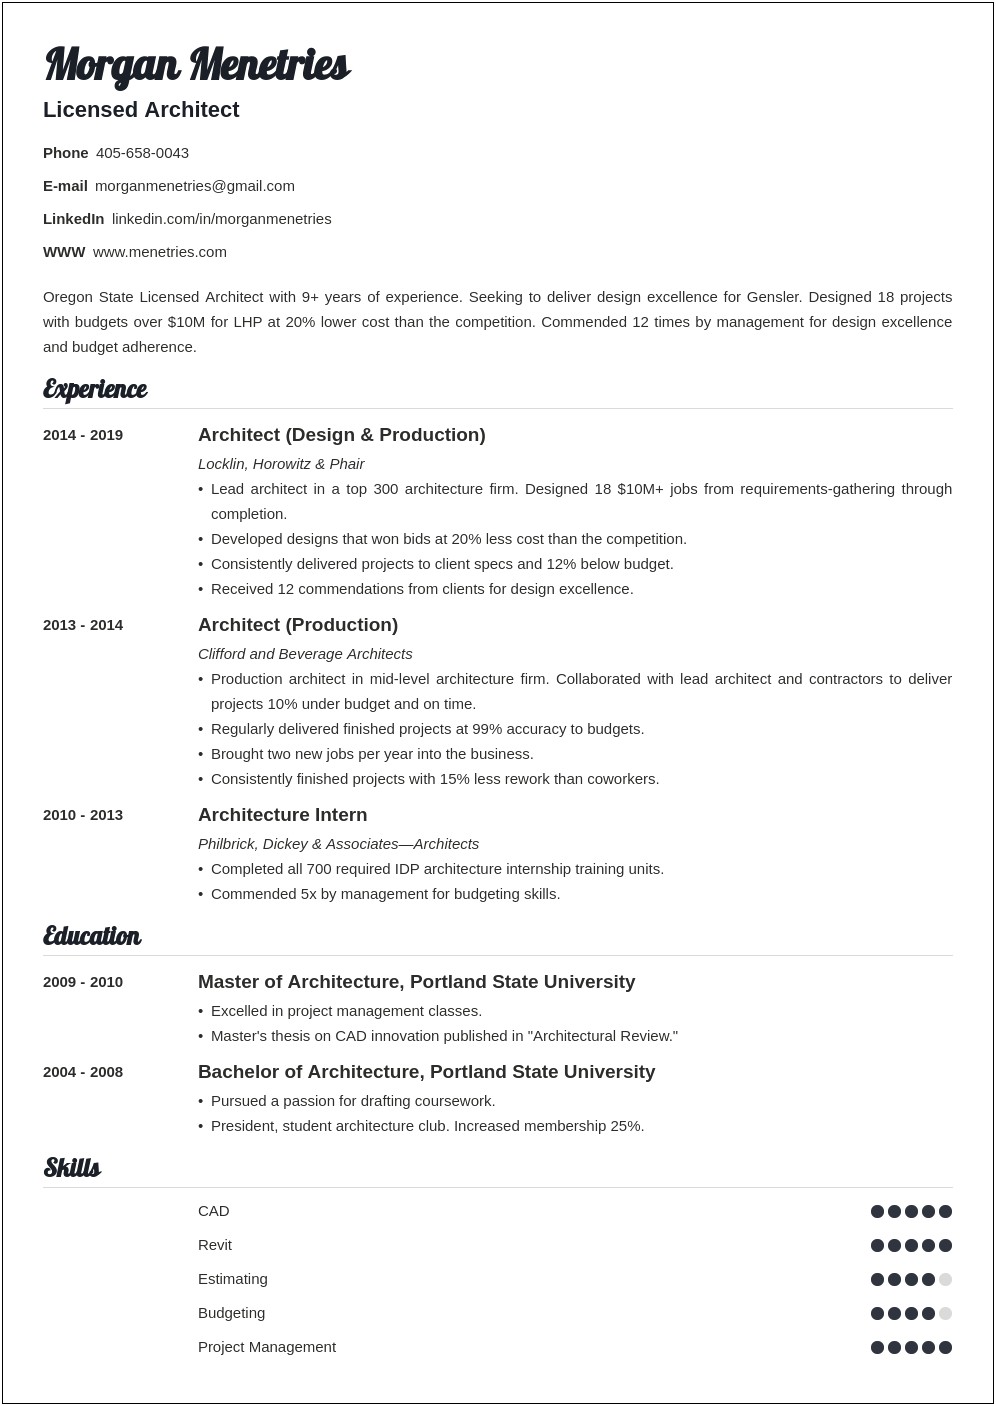 Skills Sectio On Resume For Architecture